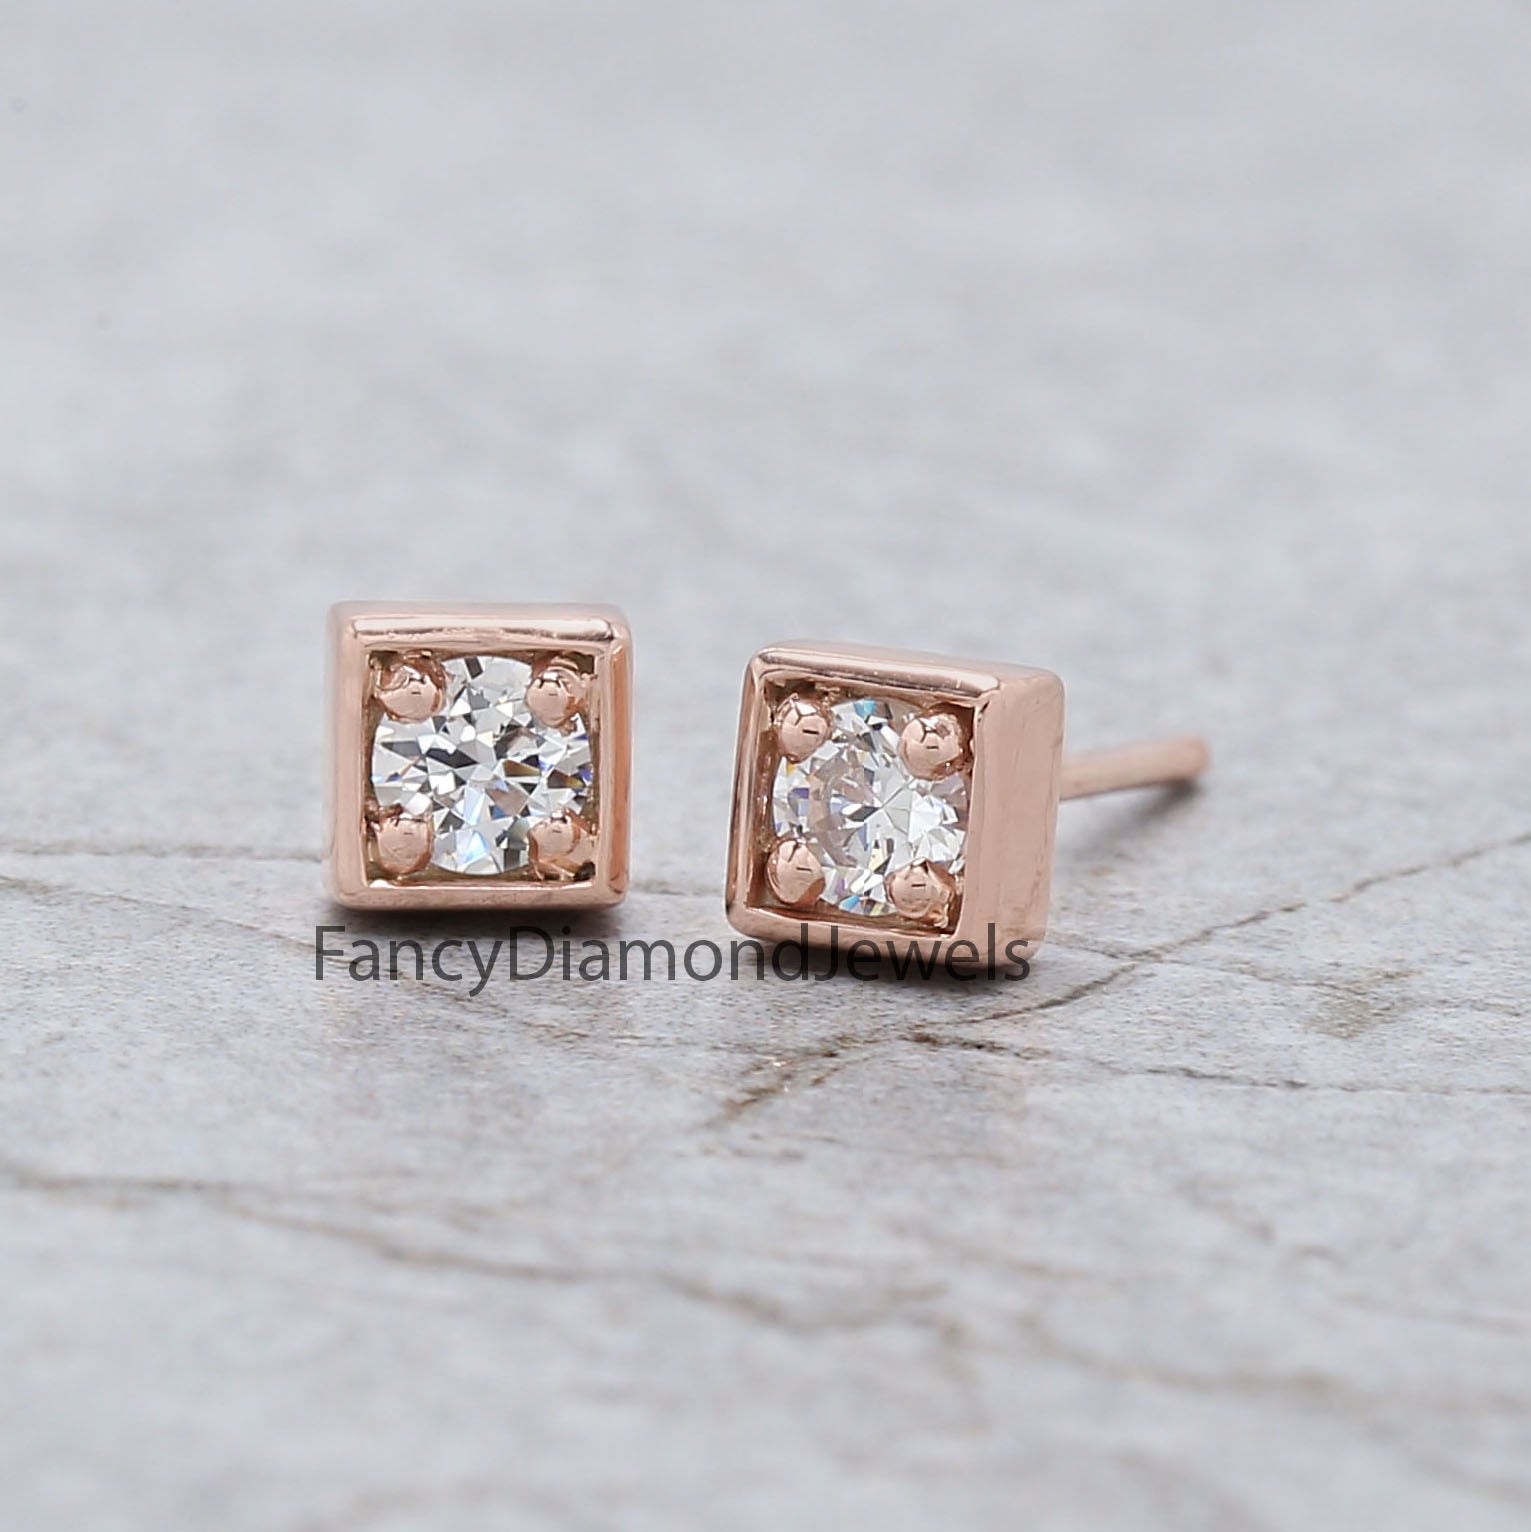 Round White Color Diamond Earring Engagement Wedding Gift Earring 14K Solid Rose White Yellow Gold Earring 0.34 CT KD1001